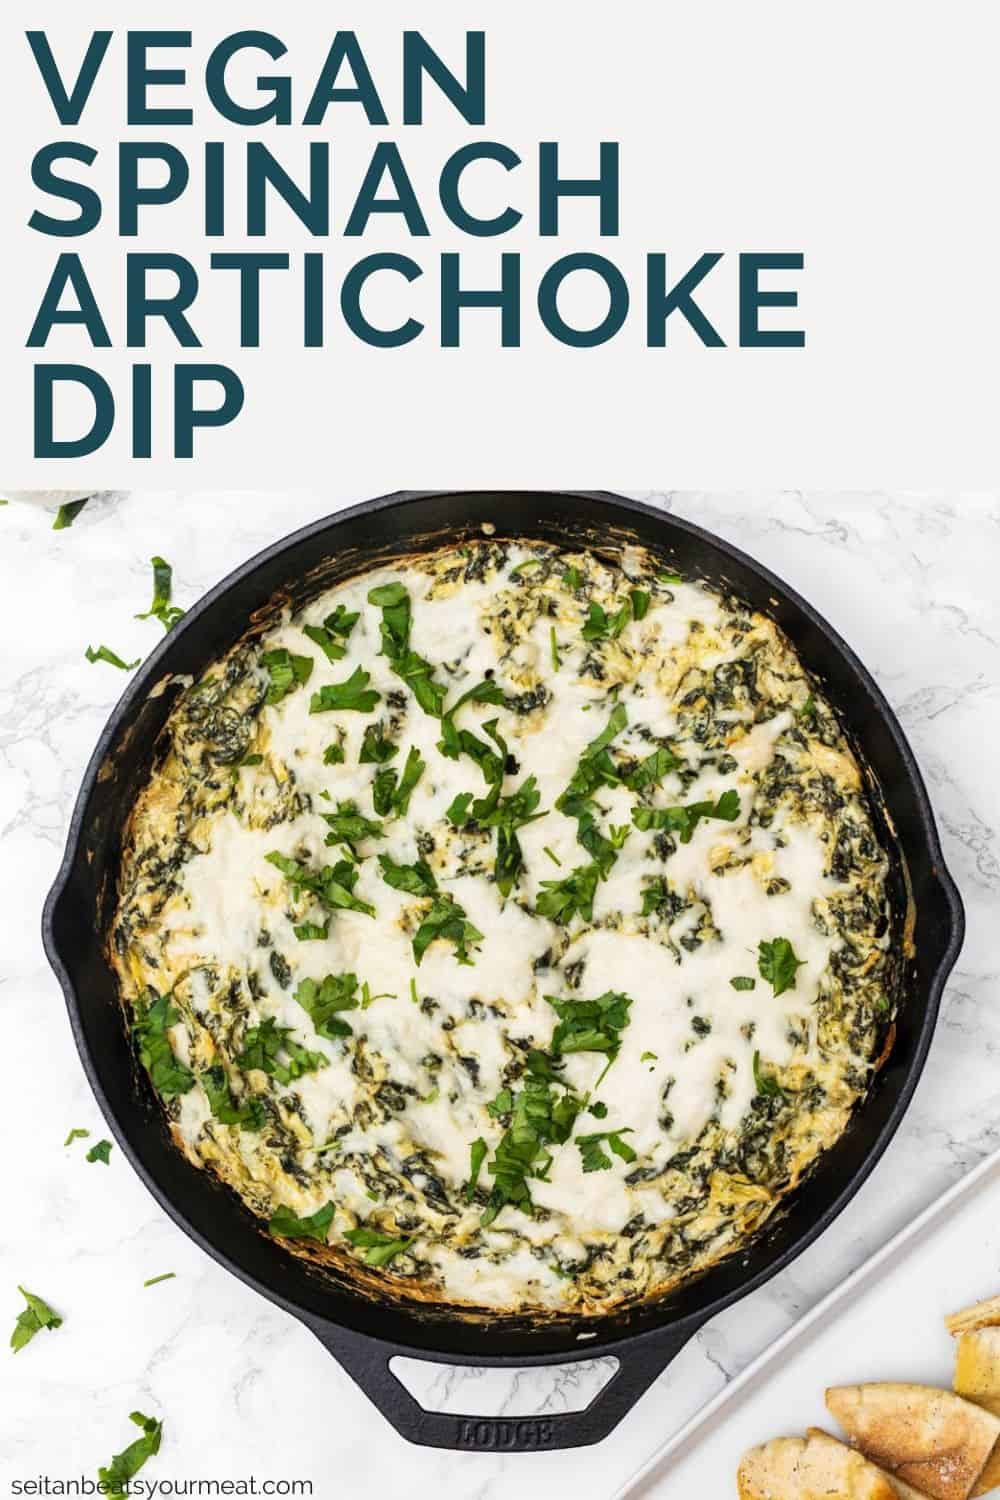 Baked spinach artichoke dip in cast iron pan with text overlay "Vegan Spinach Artichoke Dip"